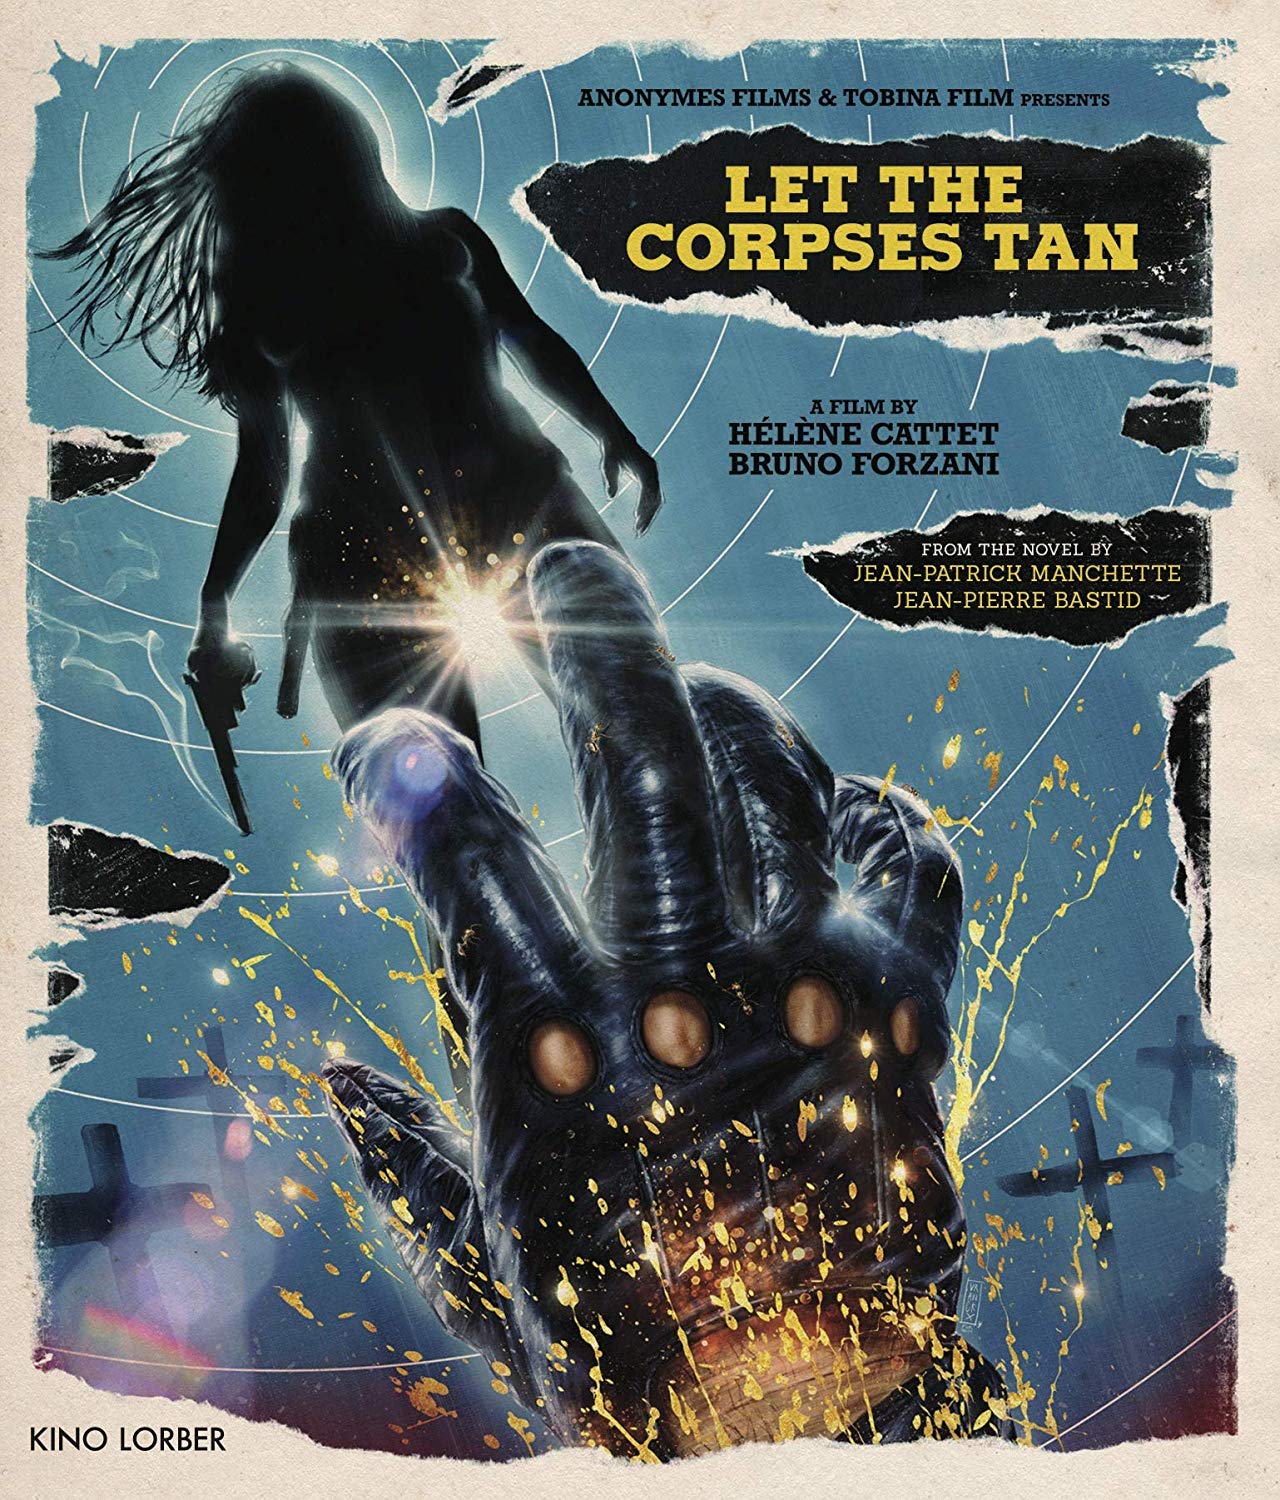 Let The Corpses Tan Blu-Ray Blu-Ray